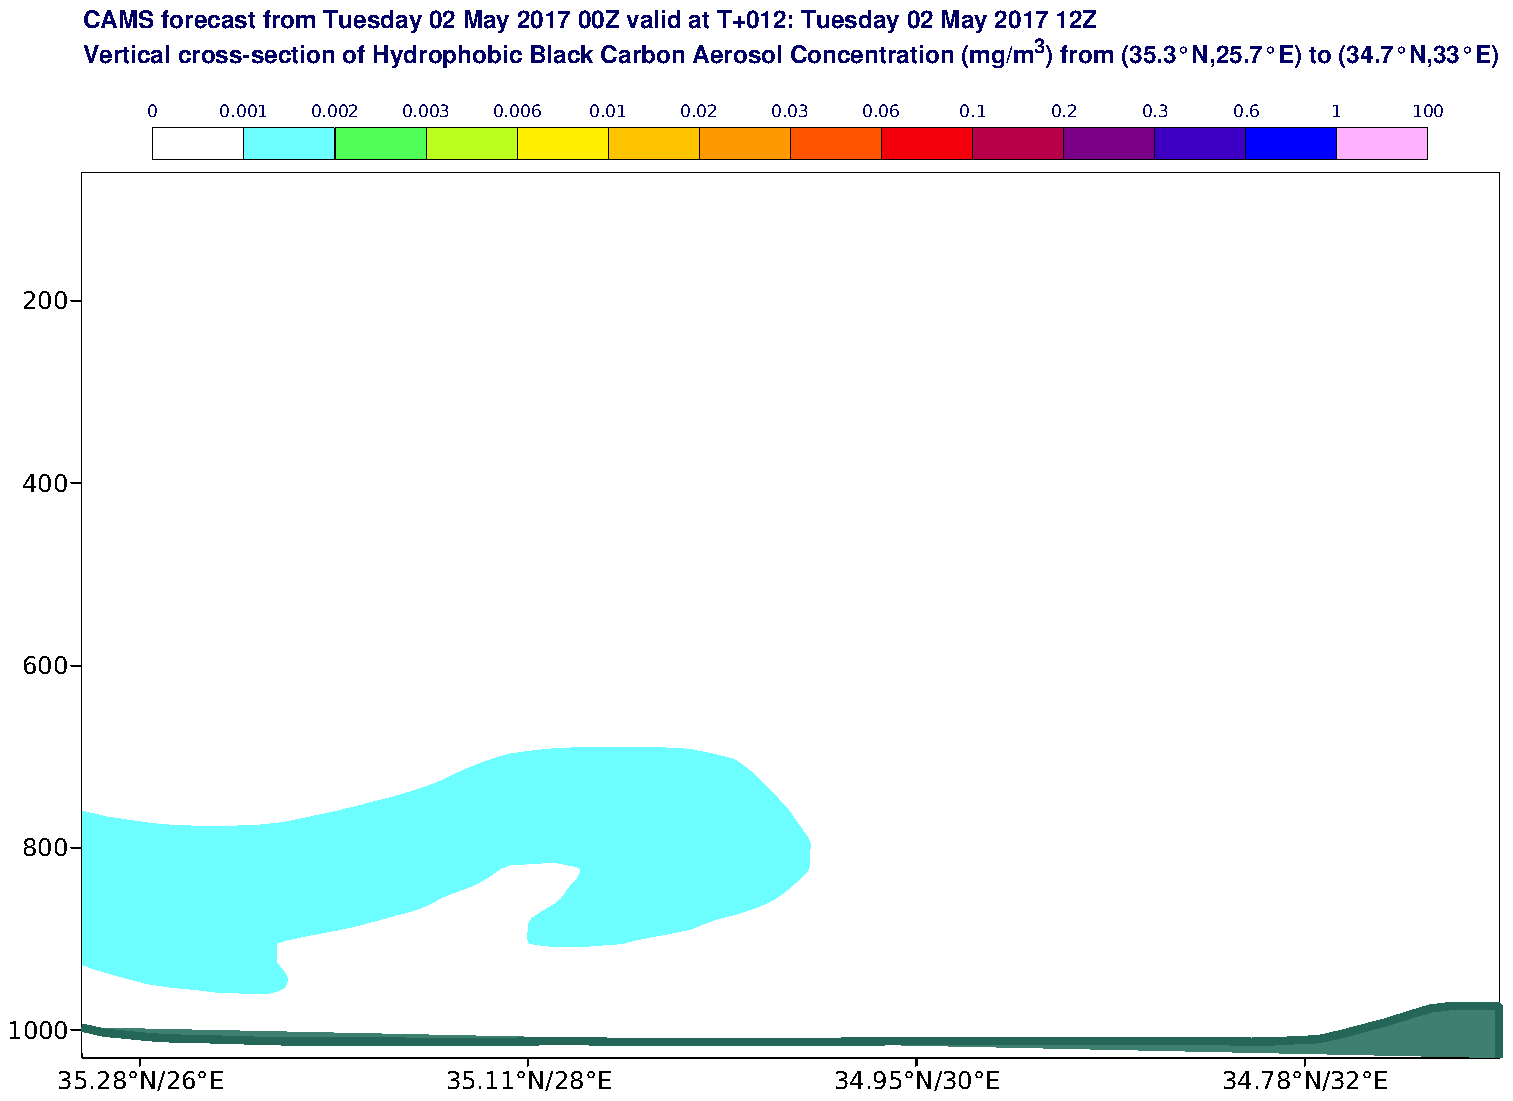 Vertical cross-section of Hydrophobic Black Carbon Aerosol Concentration (mg/m3) valid at T12 - 2017-05-02 12:00